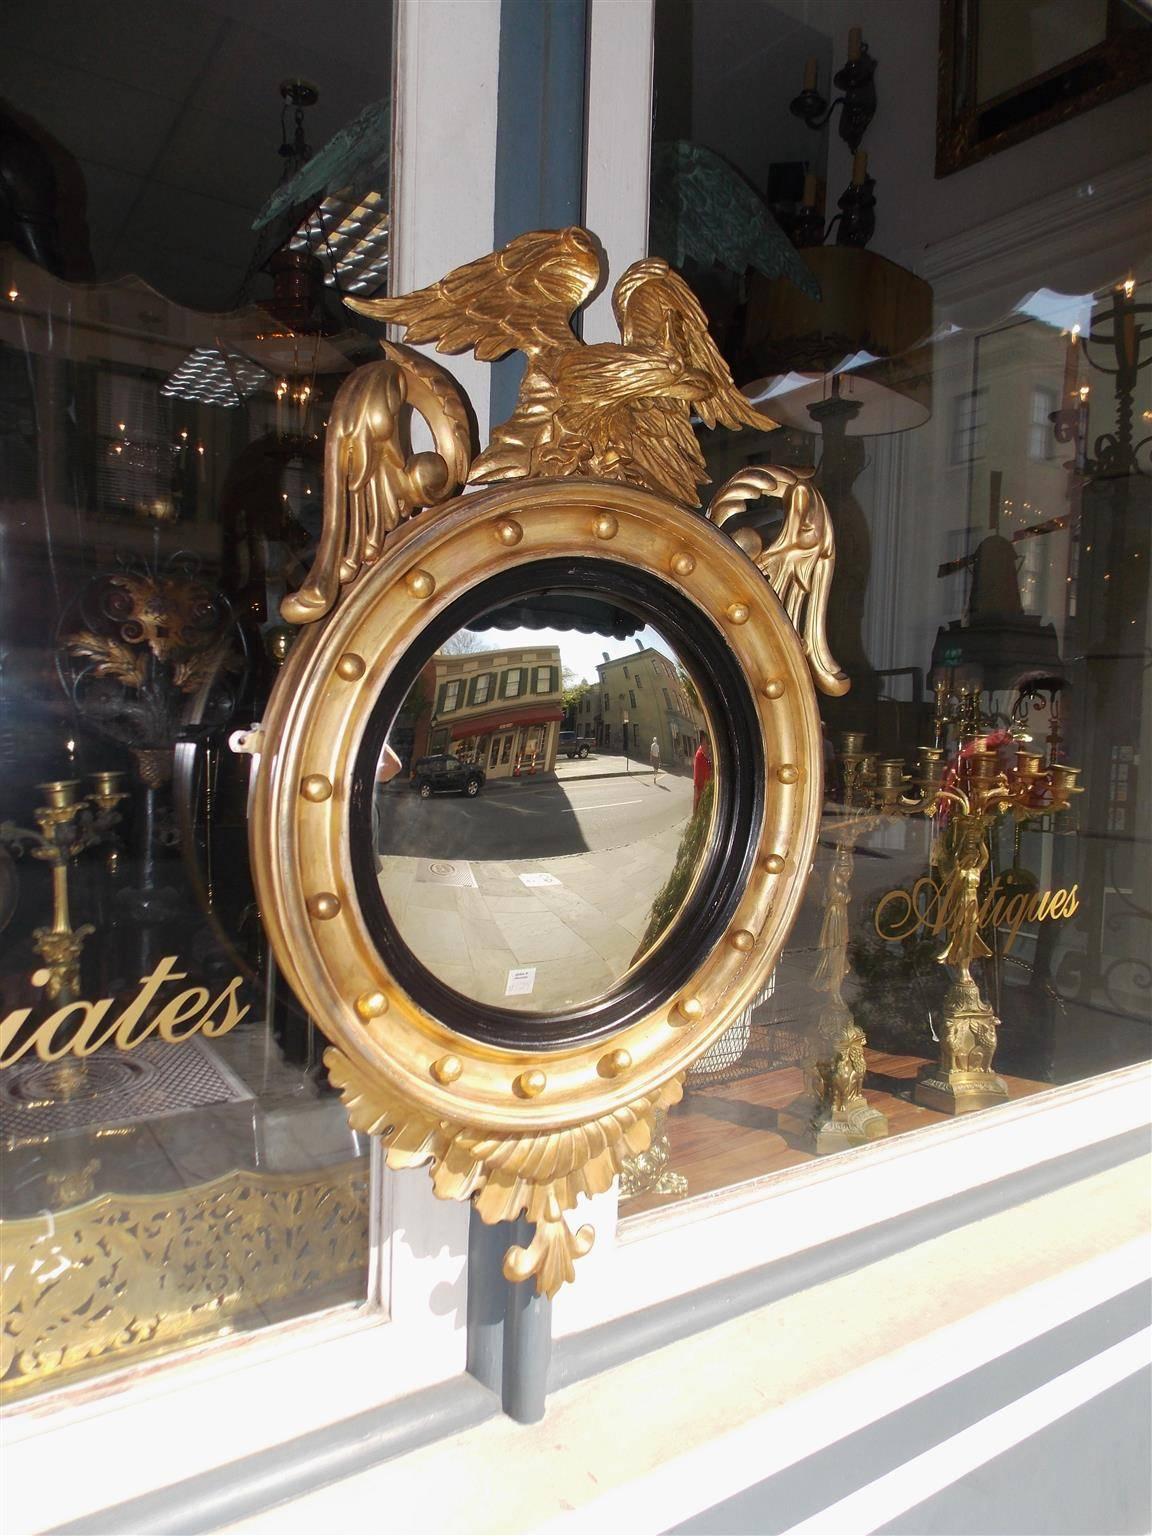 American gilt carved wood convex mirror with a perched eagle over flanking acanthus foliage, interior circular spheres, ebonized reeded ring, and terminating at bottom with acanthus floral pendant. Mirror retains the original glass and wood back,